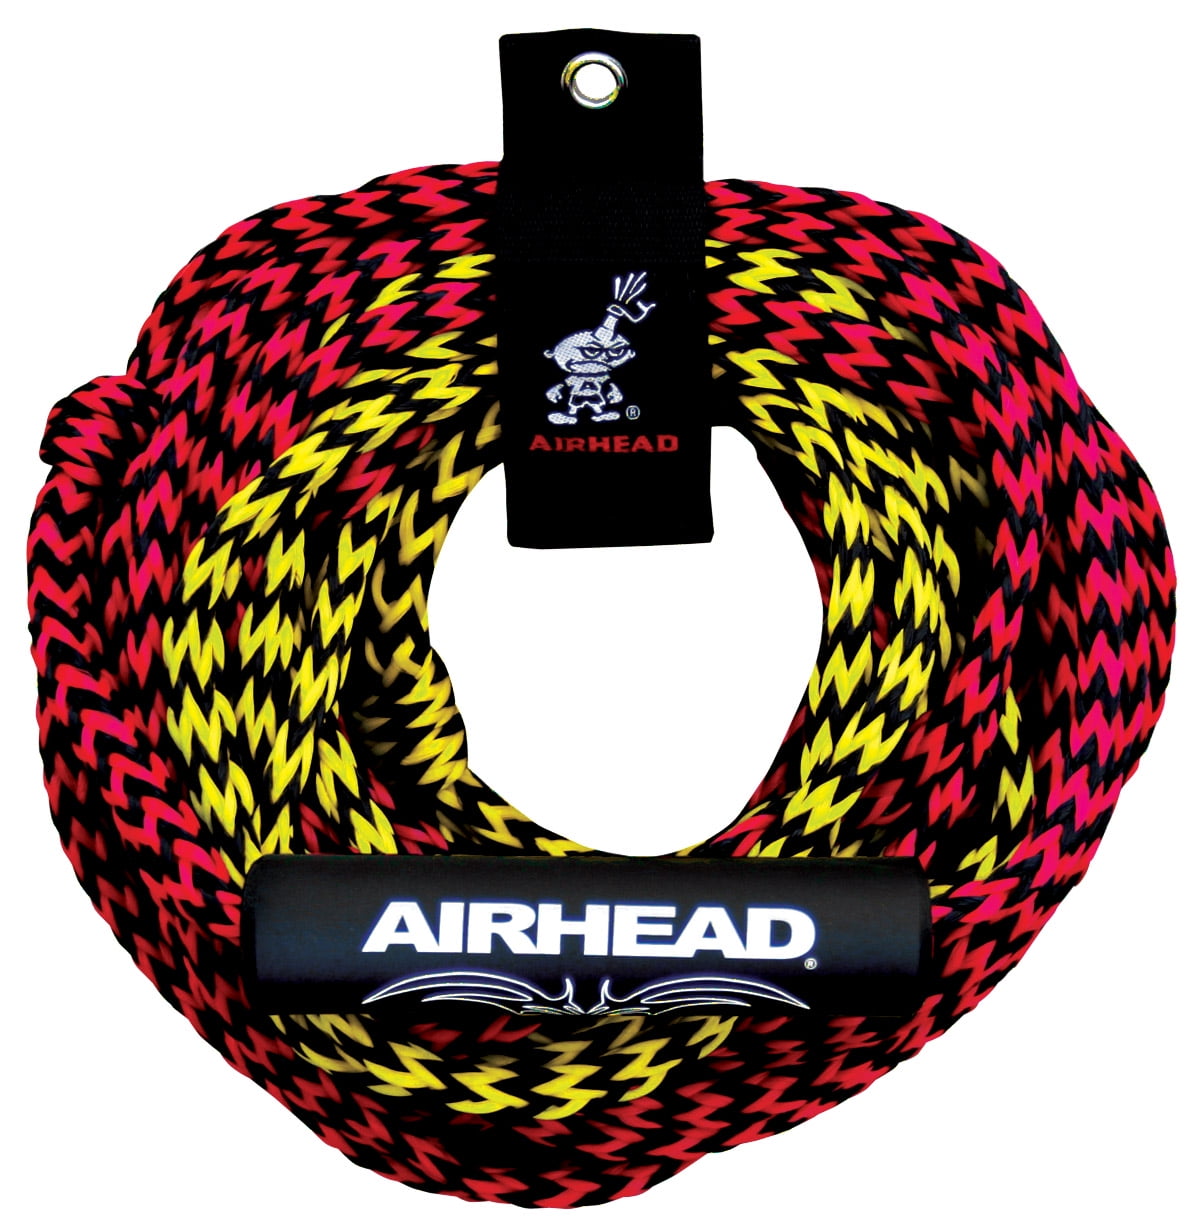 Boating Airhead Super Strength Water Tube Tow Rope ahtr-6000 Yellow/Black 